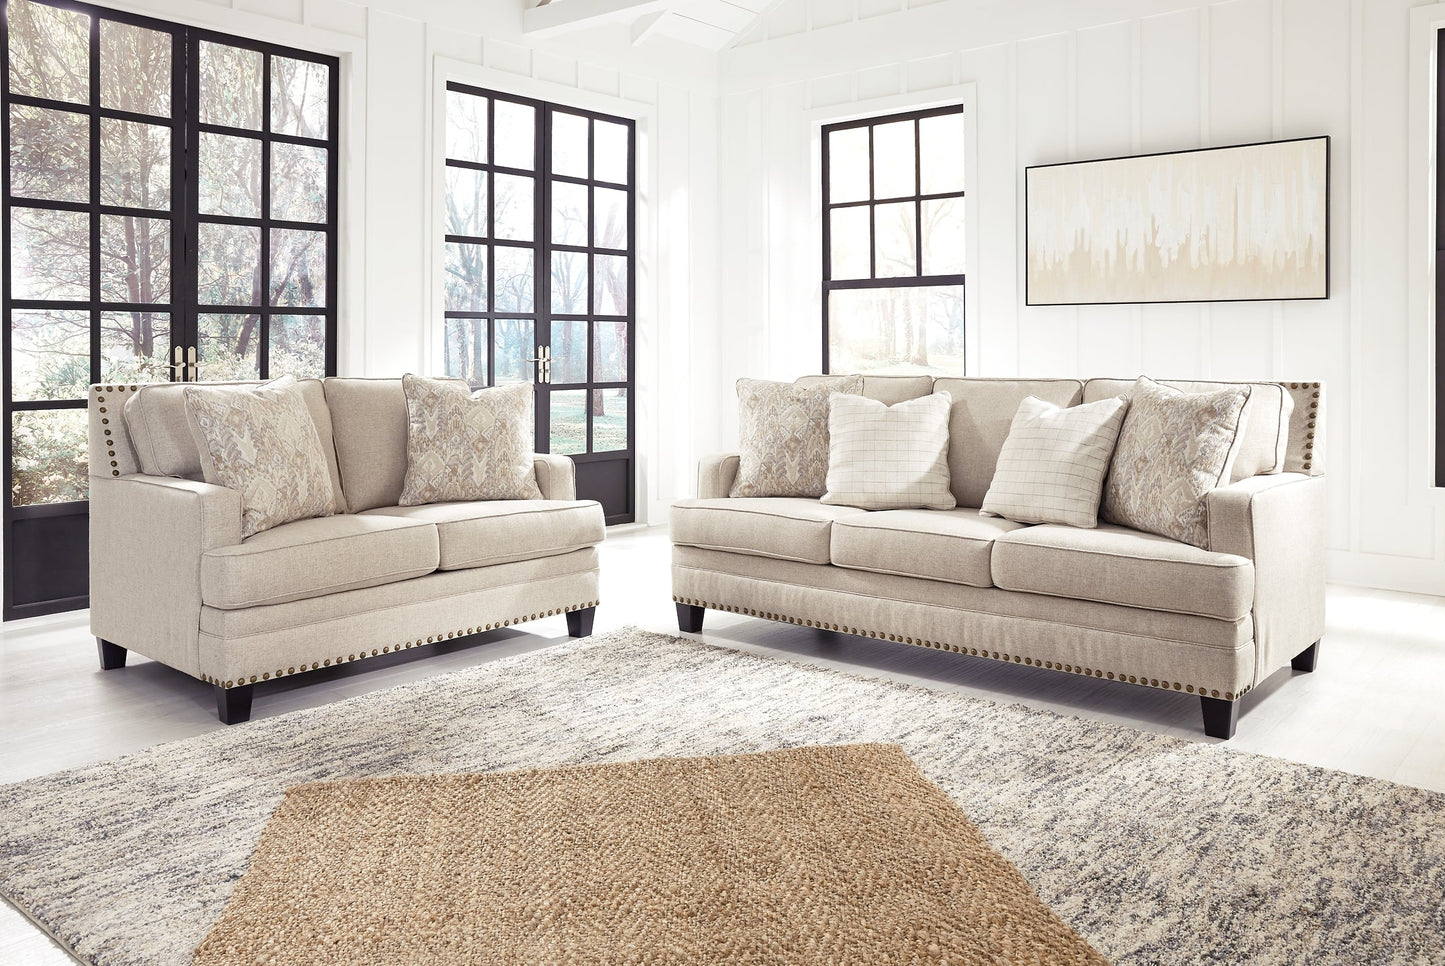 Claredon Sofa and Loveseat at Walker Mattress and Furniture Locations in Cedar Park and Belton TX.